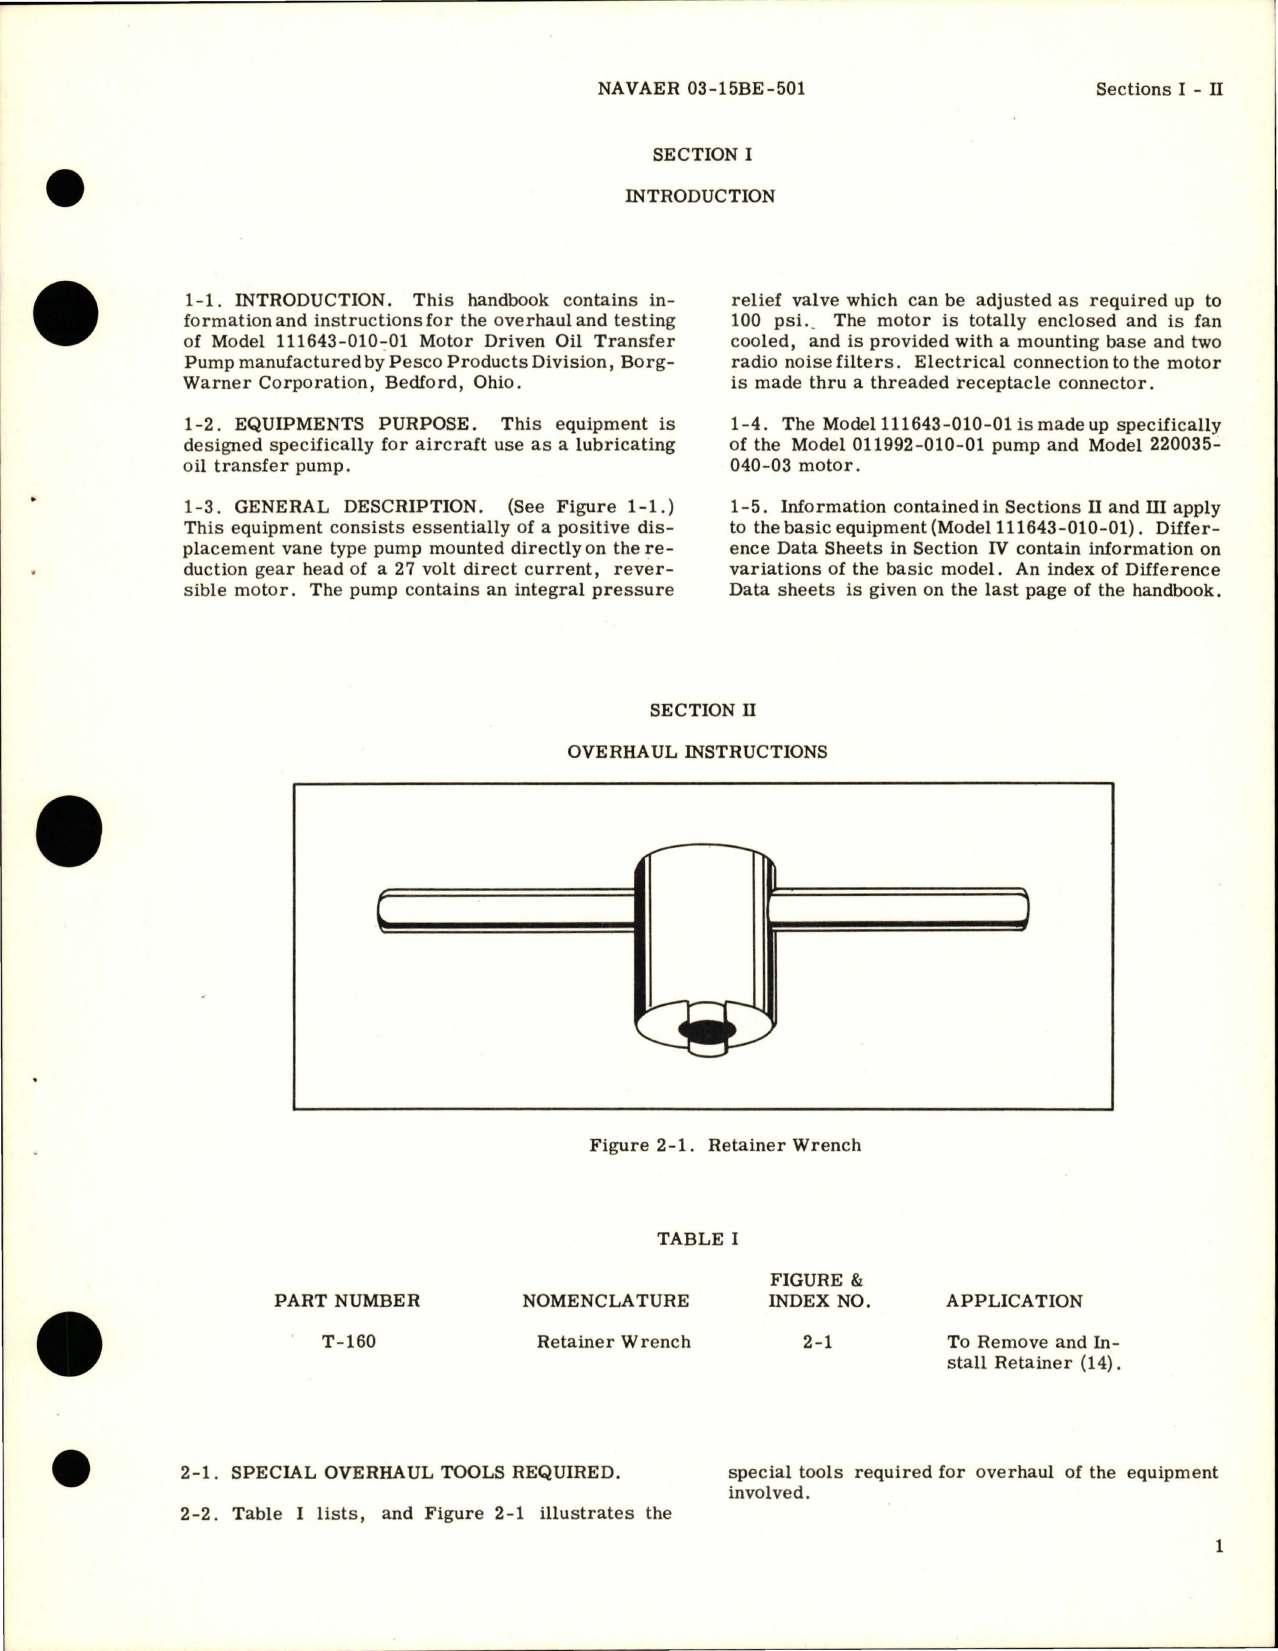 Sample page 5 from AirCorps Library document: Overhaul Instructions for Electric Motor Driven Oil Transfer Pump - 11643 Series